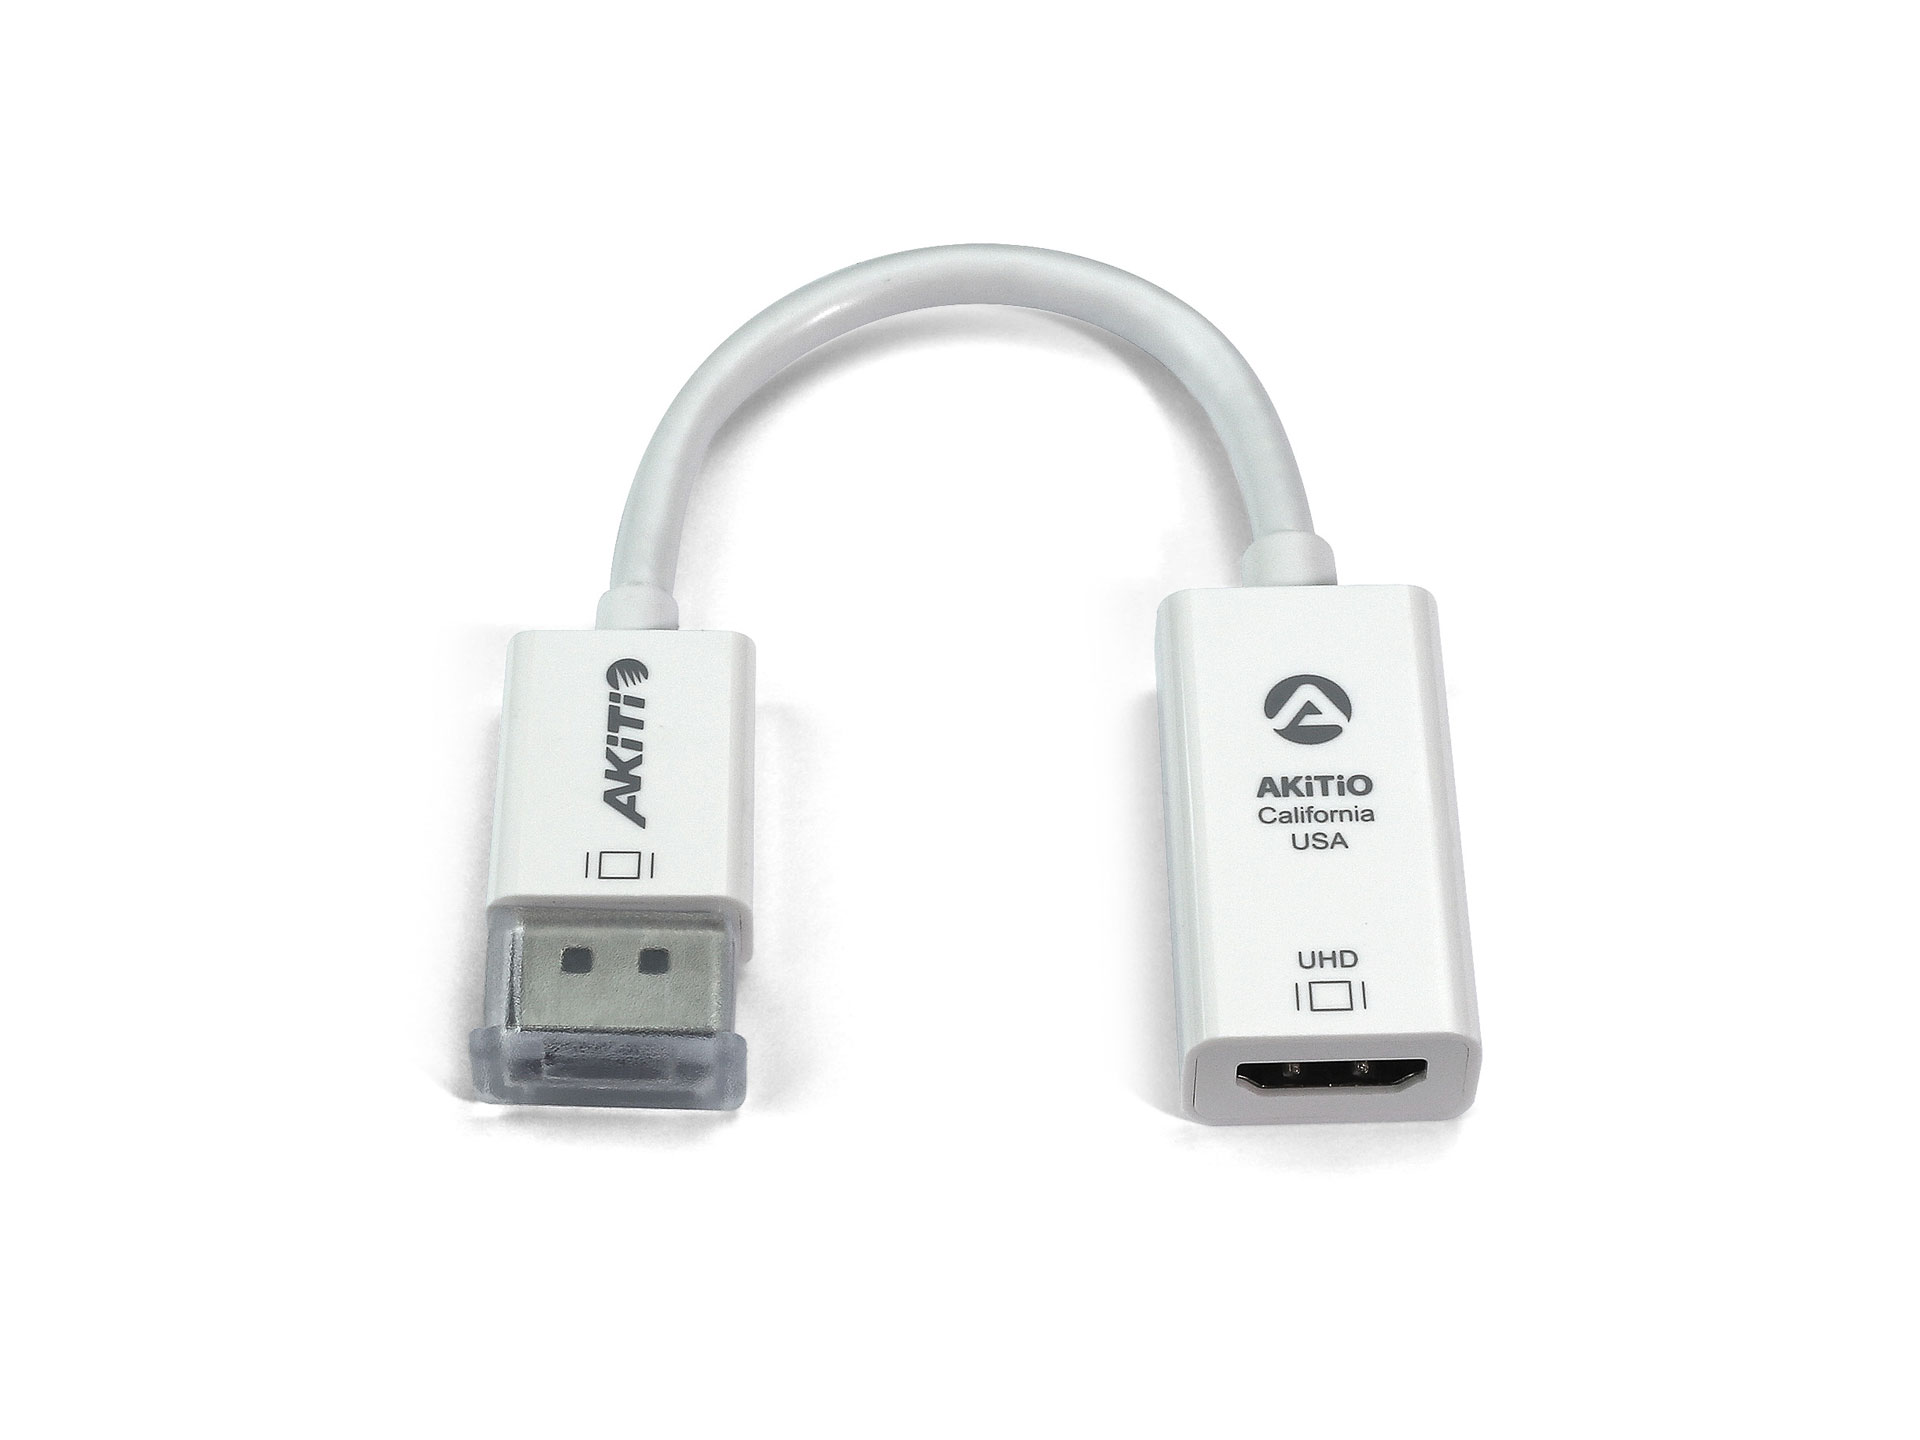 HDMI to DisplayPort Cable - HDMI to DP Adapter - Active Cable